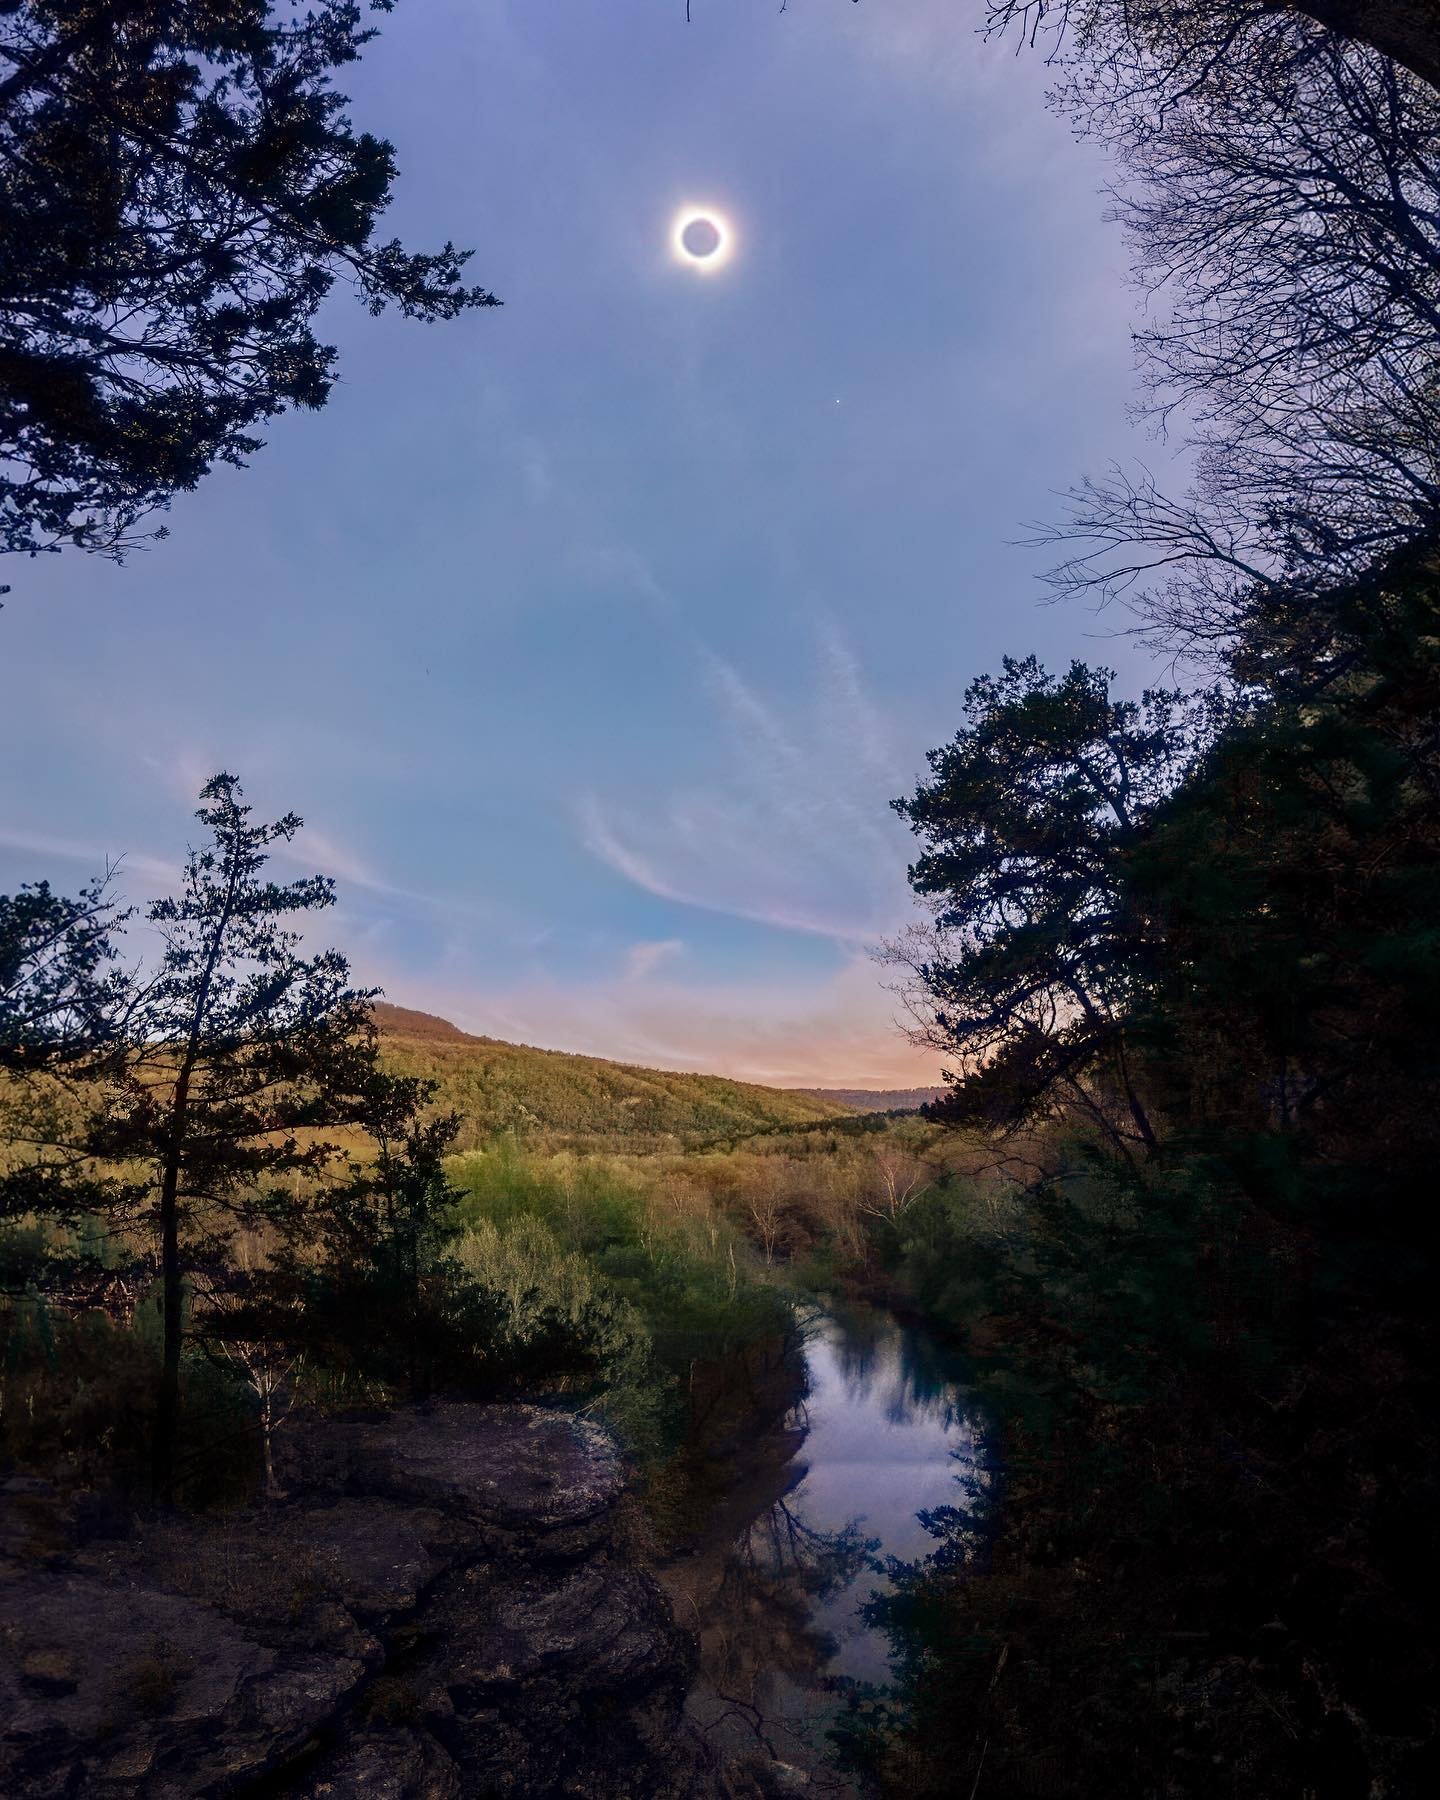 I really have no words to describe how beautiful the total eclipse was today over the Buffalo National River and the pics / vids can not possibly do it justice! Thankful to have the opportunity to watch today and make a fun trip out of it with @tanne